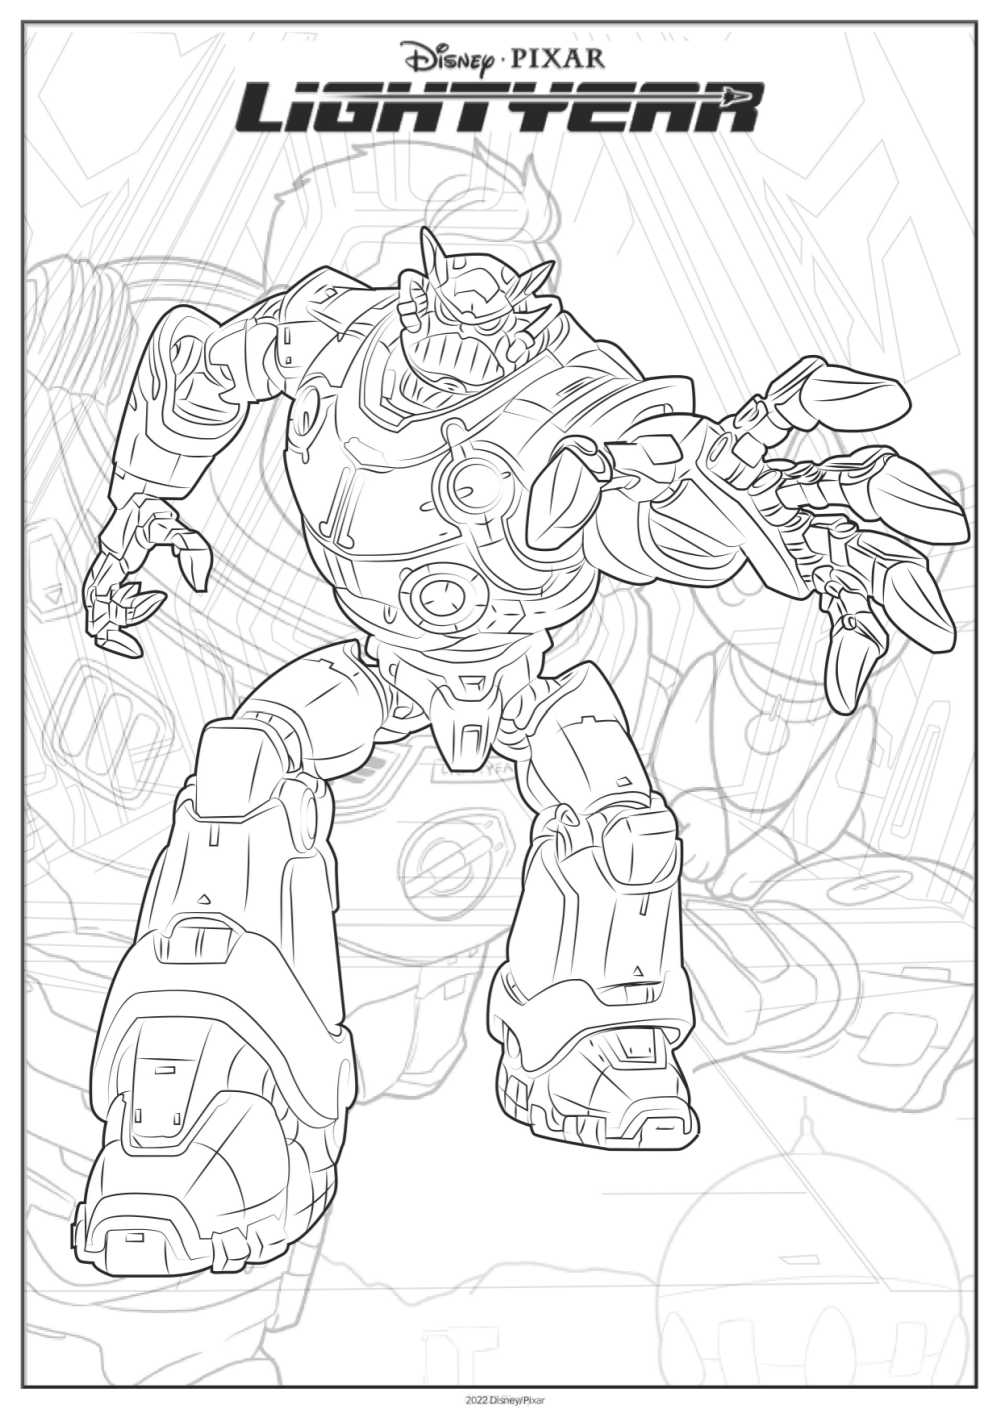 lightyear zurg coloring page